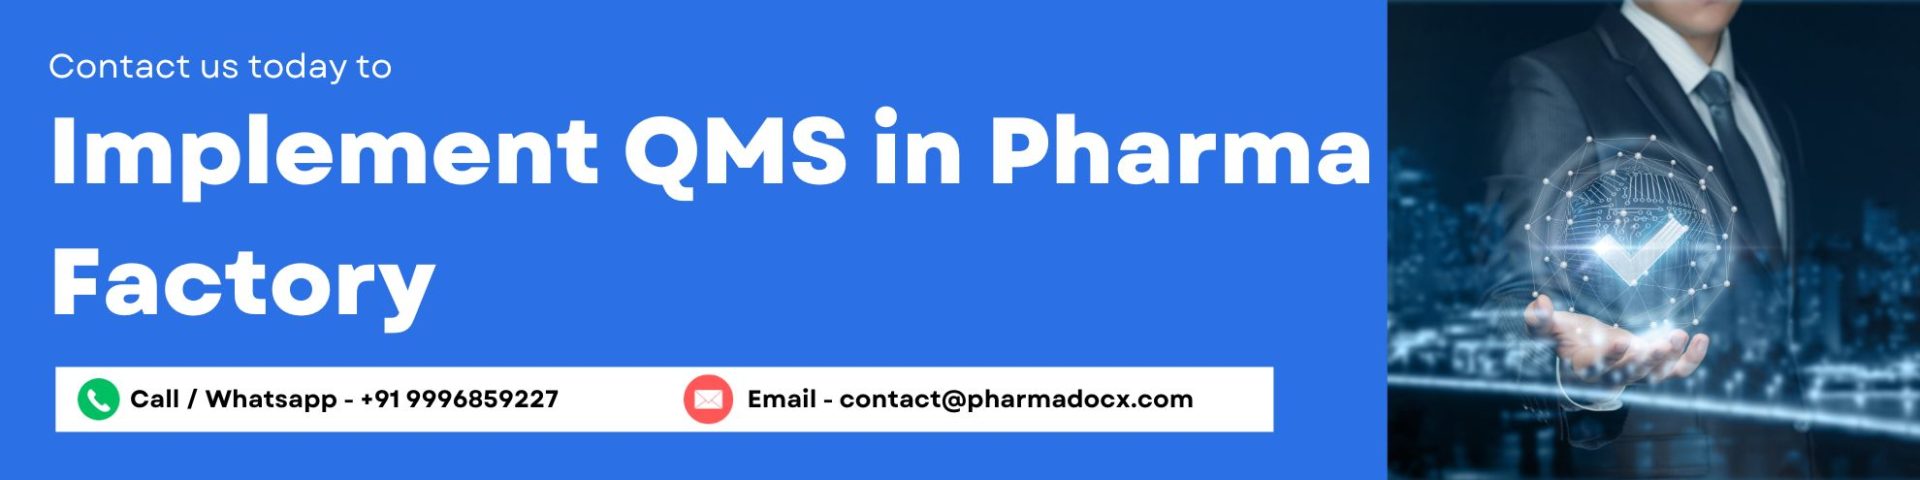 implement qms in pharma factory